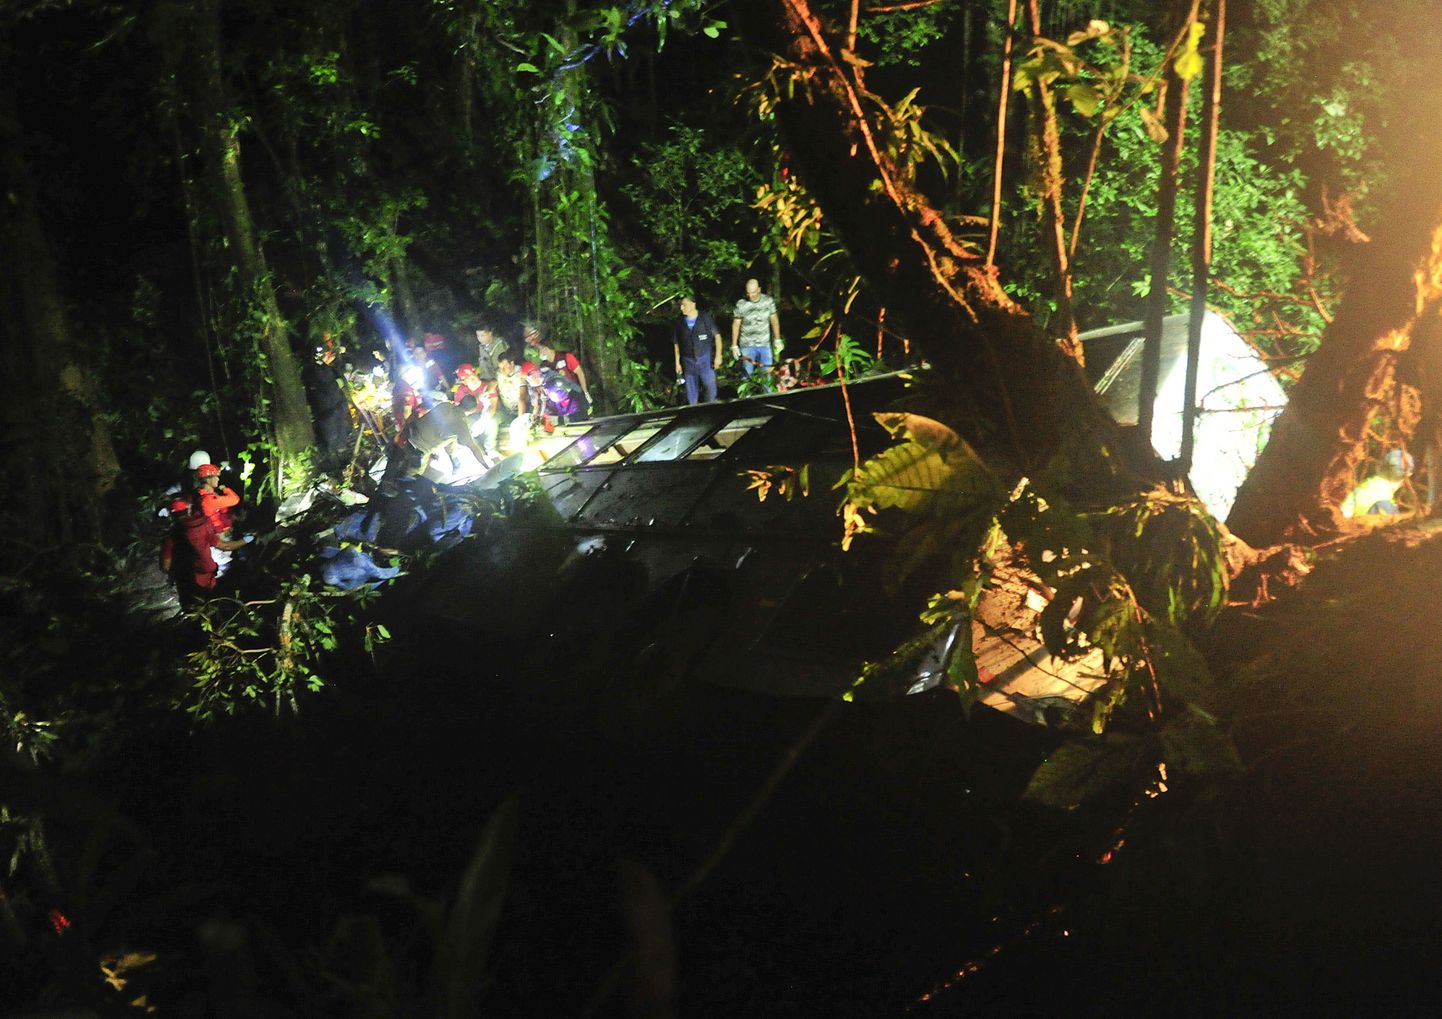 Rescue personnel work at the site where a tourist bus crashed killing at least 49 people, according to the the Santa Catarina State security secretary, near the city of Joinville, southern state of Santa Catarina, Brazil, Saturday, March 14, 2015. (AP Photo/Salmo Duarte, Agence RBS)